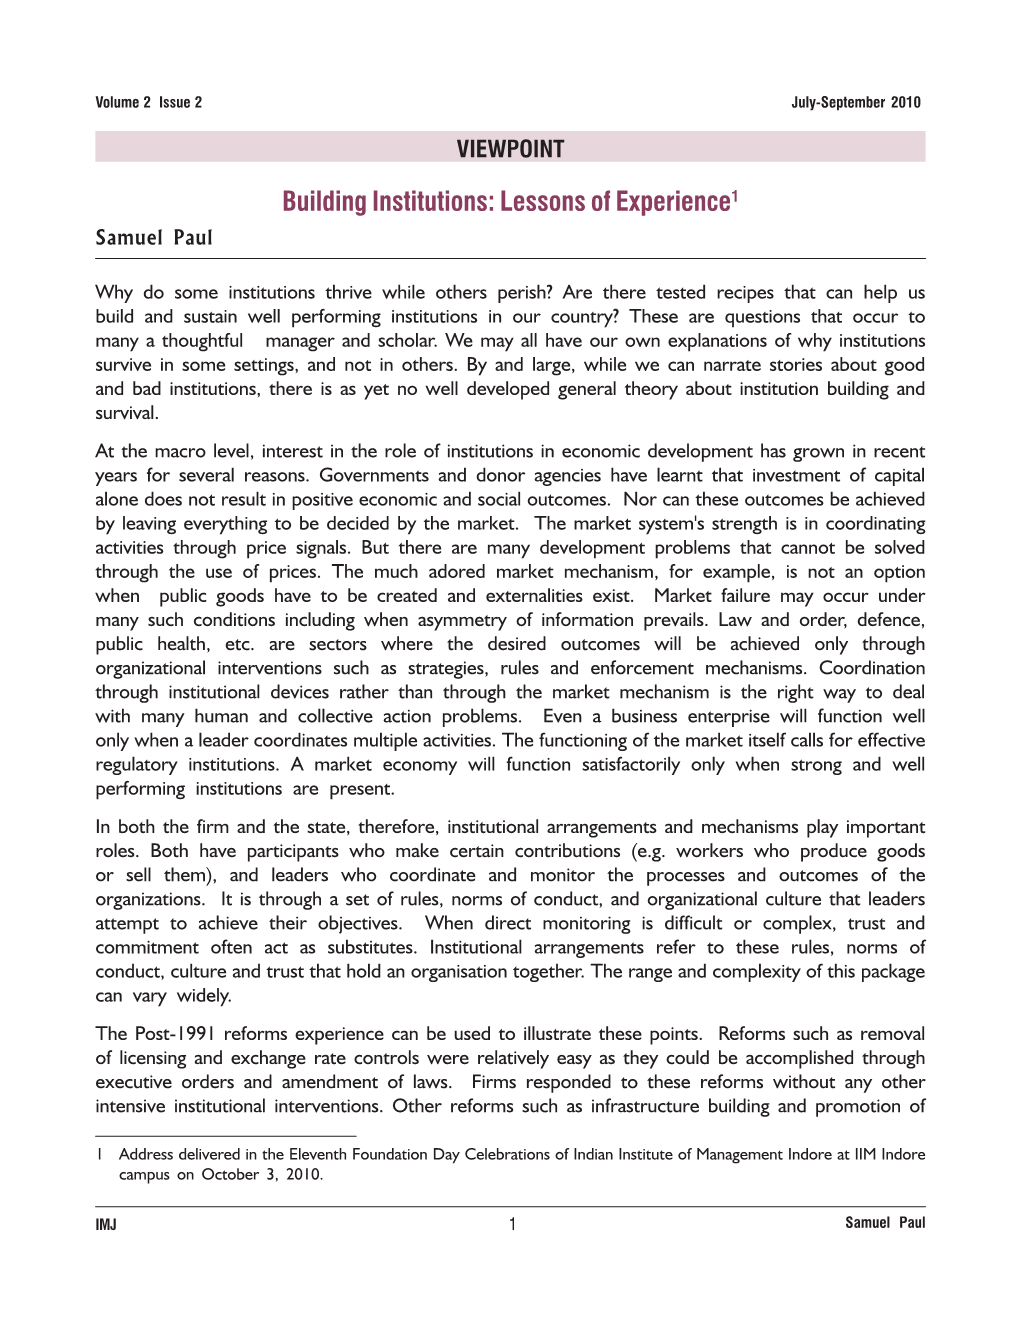 Building Institutions: Lessons of Experience1 Samuel Paul